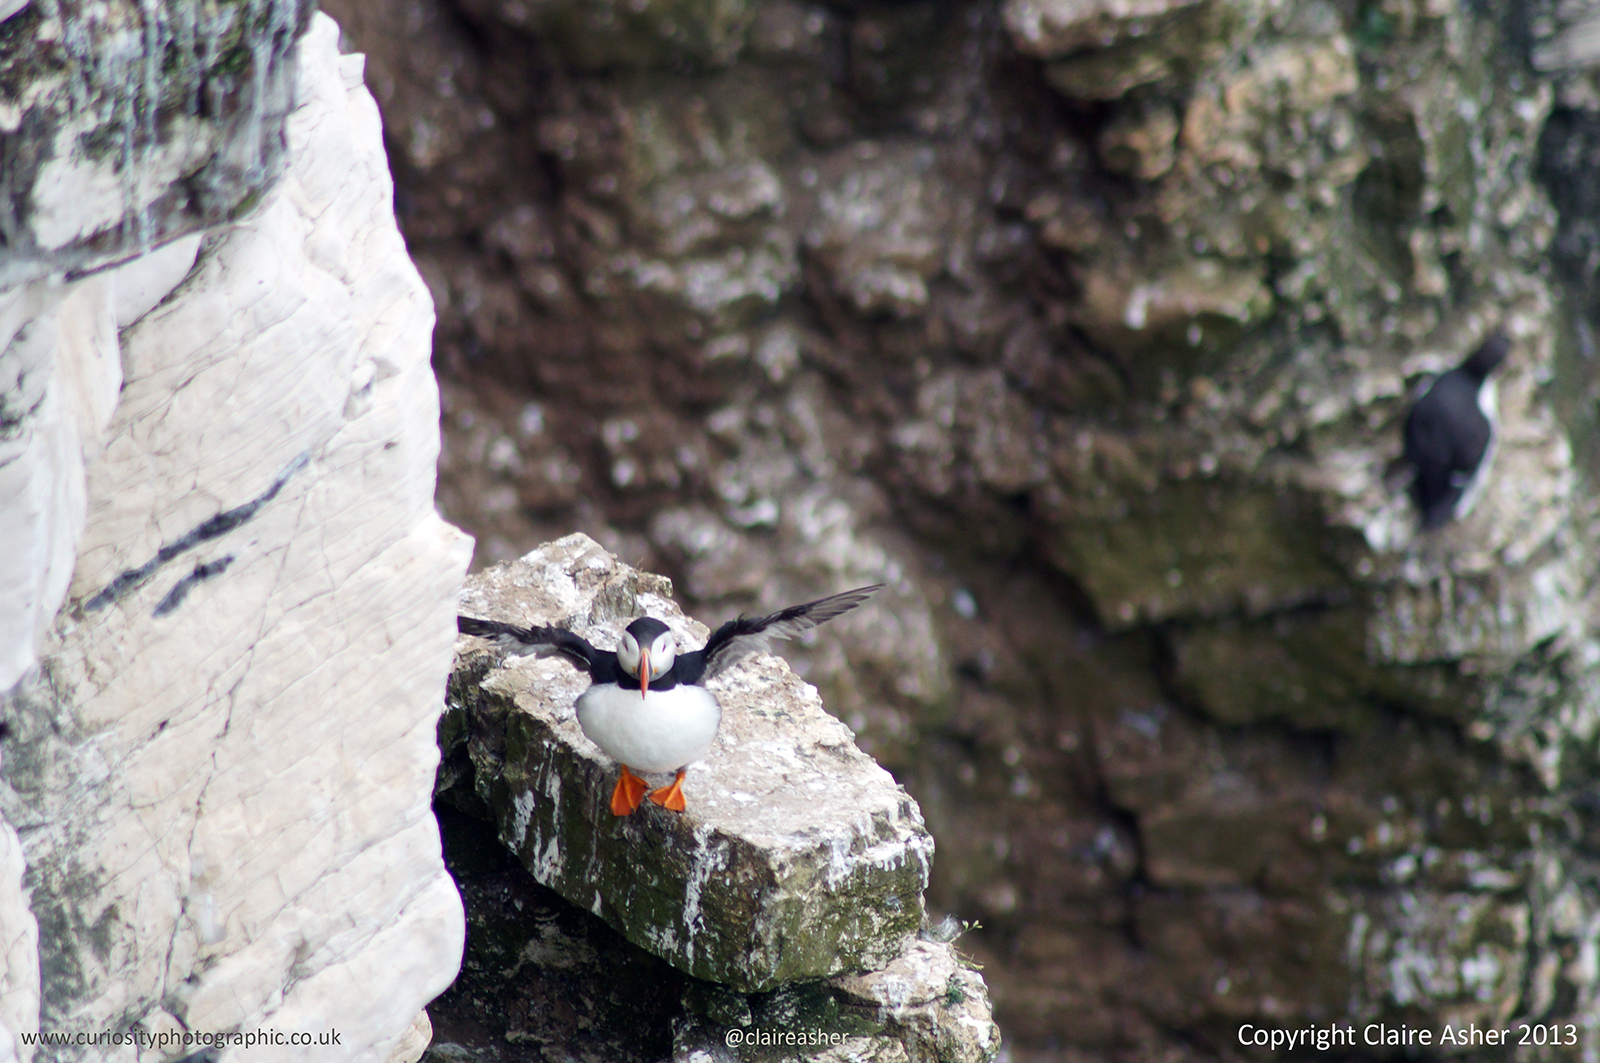 An Atlantic Puffin (Fratercula arctica) photographed in Yorkshire, England in 2013. 